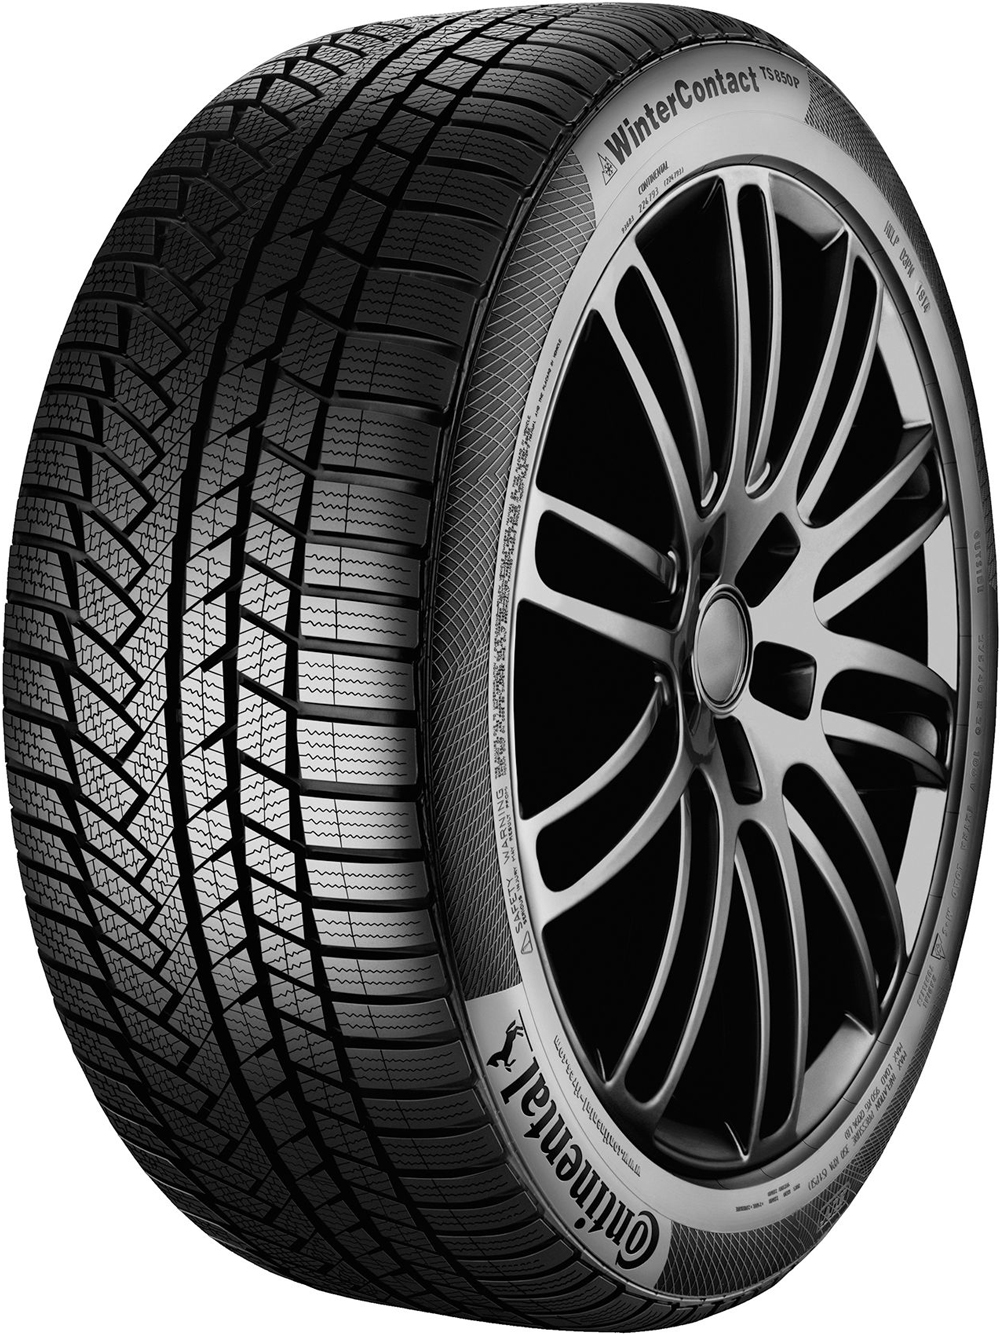 Anvelope jeep CONTINENTAL TS850 P SUV FP 275/45 R20 110V